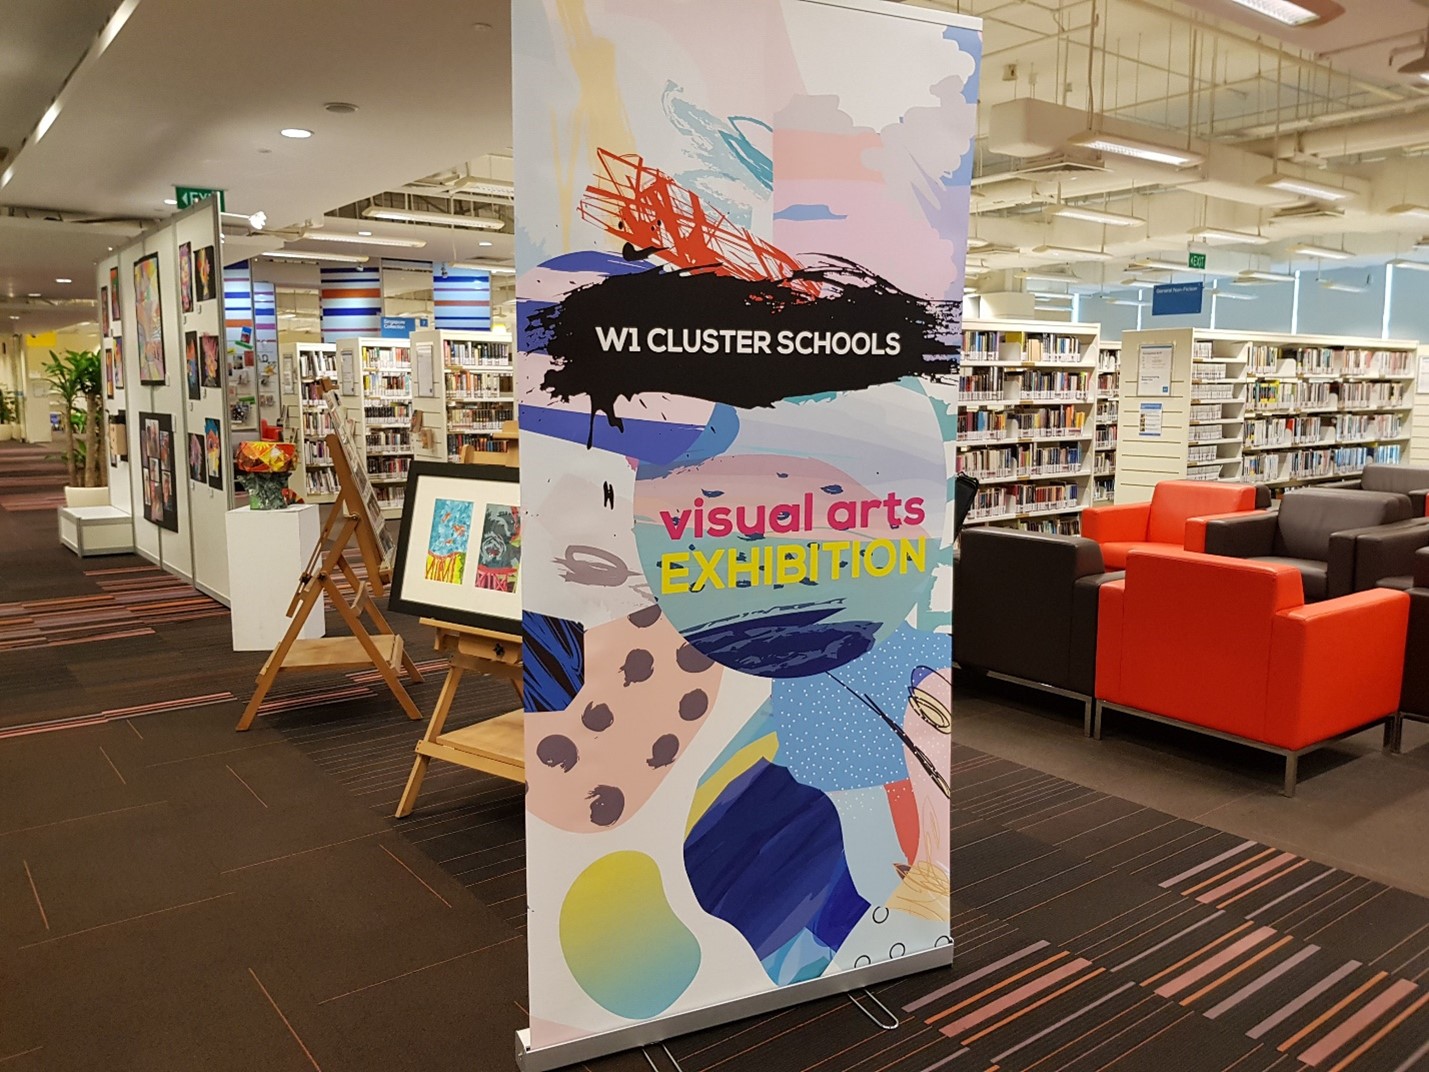 Annual W1 Schools Art Exhibition at Clementi Public Library